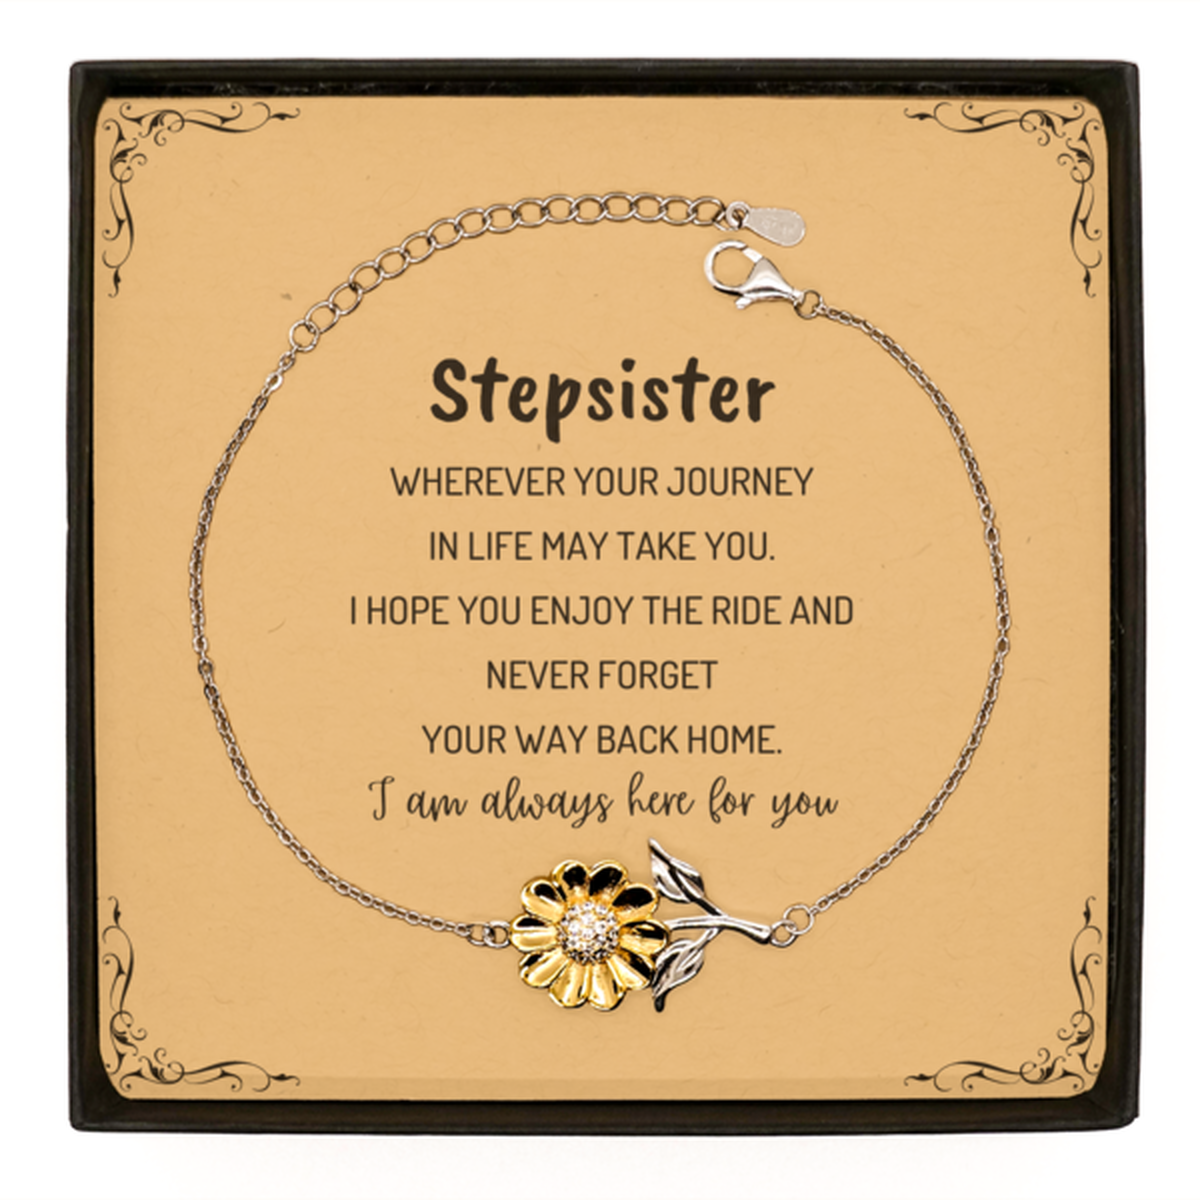 Stepsister wherever your journey in life may take you, I am always here for you Stepsister Sunflower Bracelet, Awesome Christmas Gifts For Stepsister Message Card, Stepsister Birthday Gifts for Men Women Family Loved One